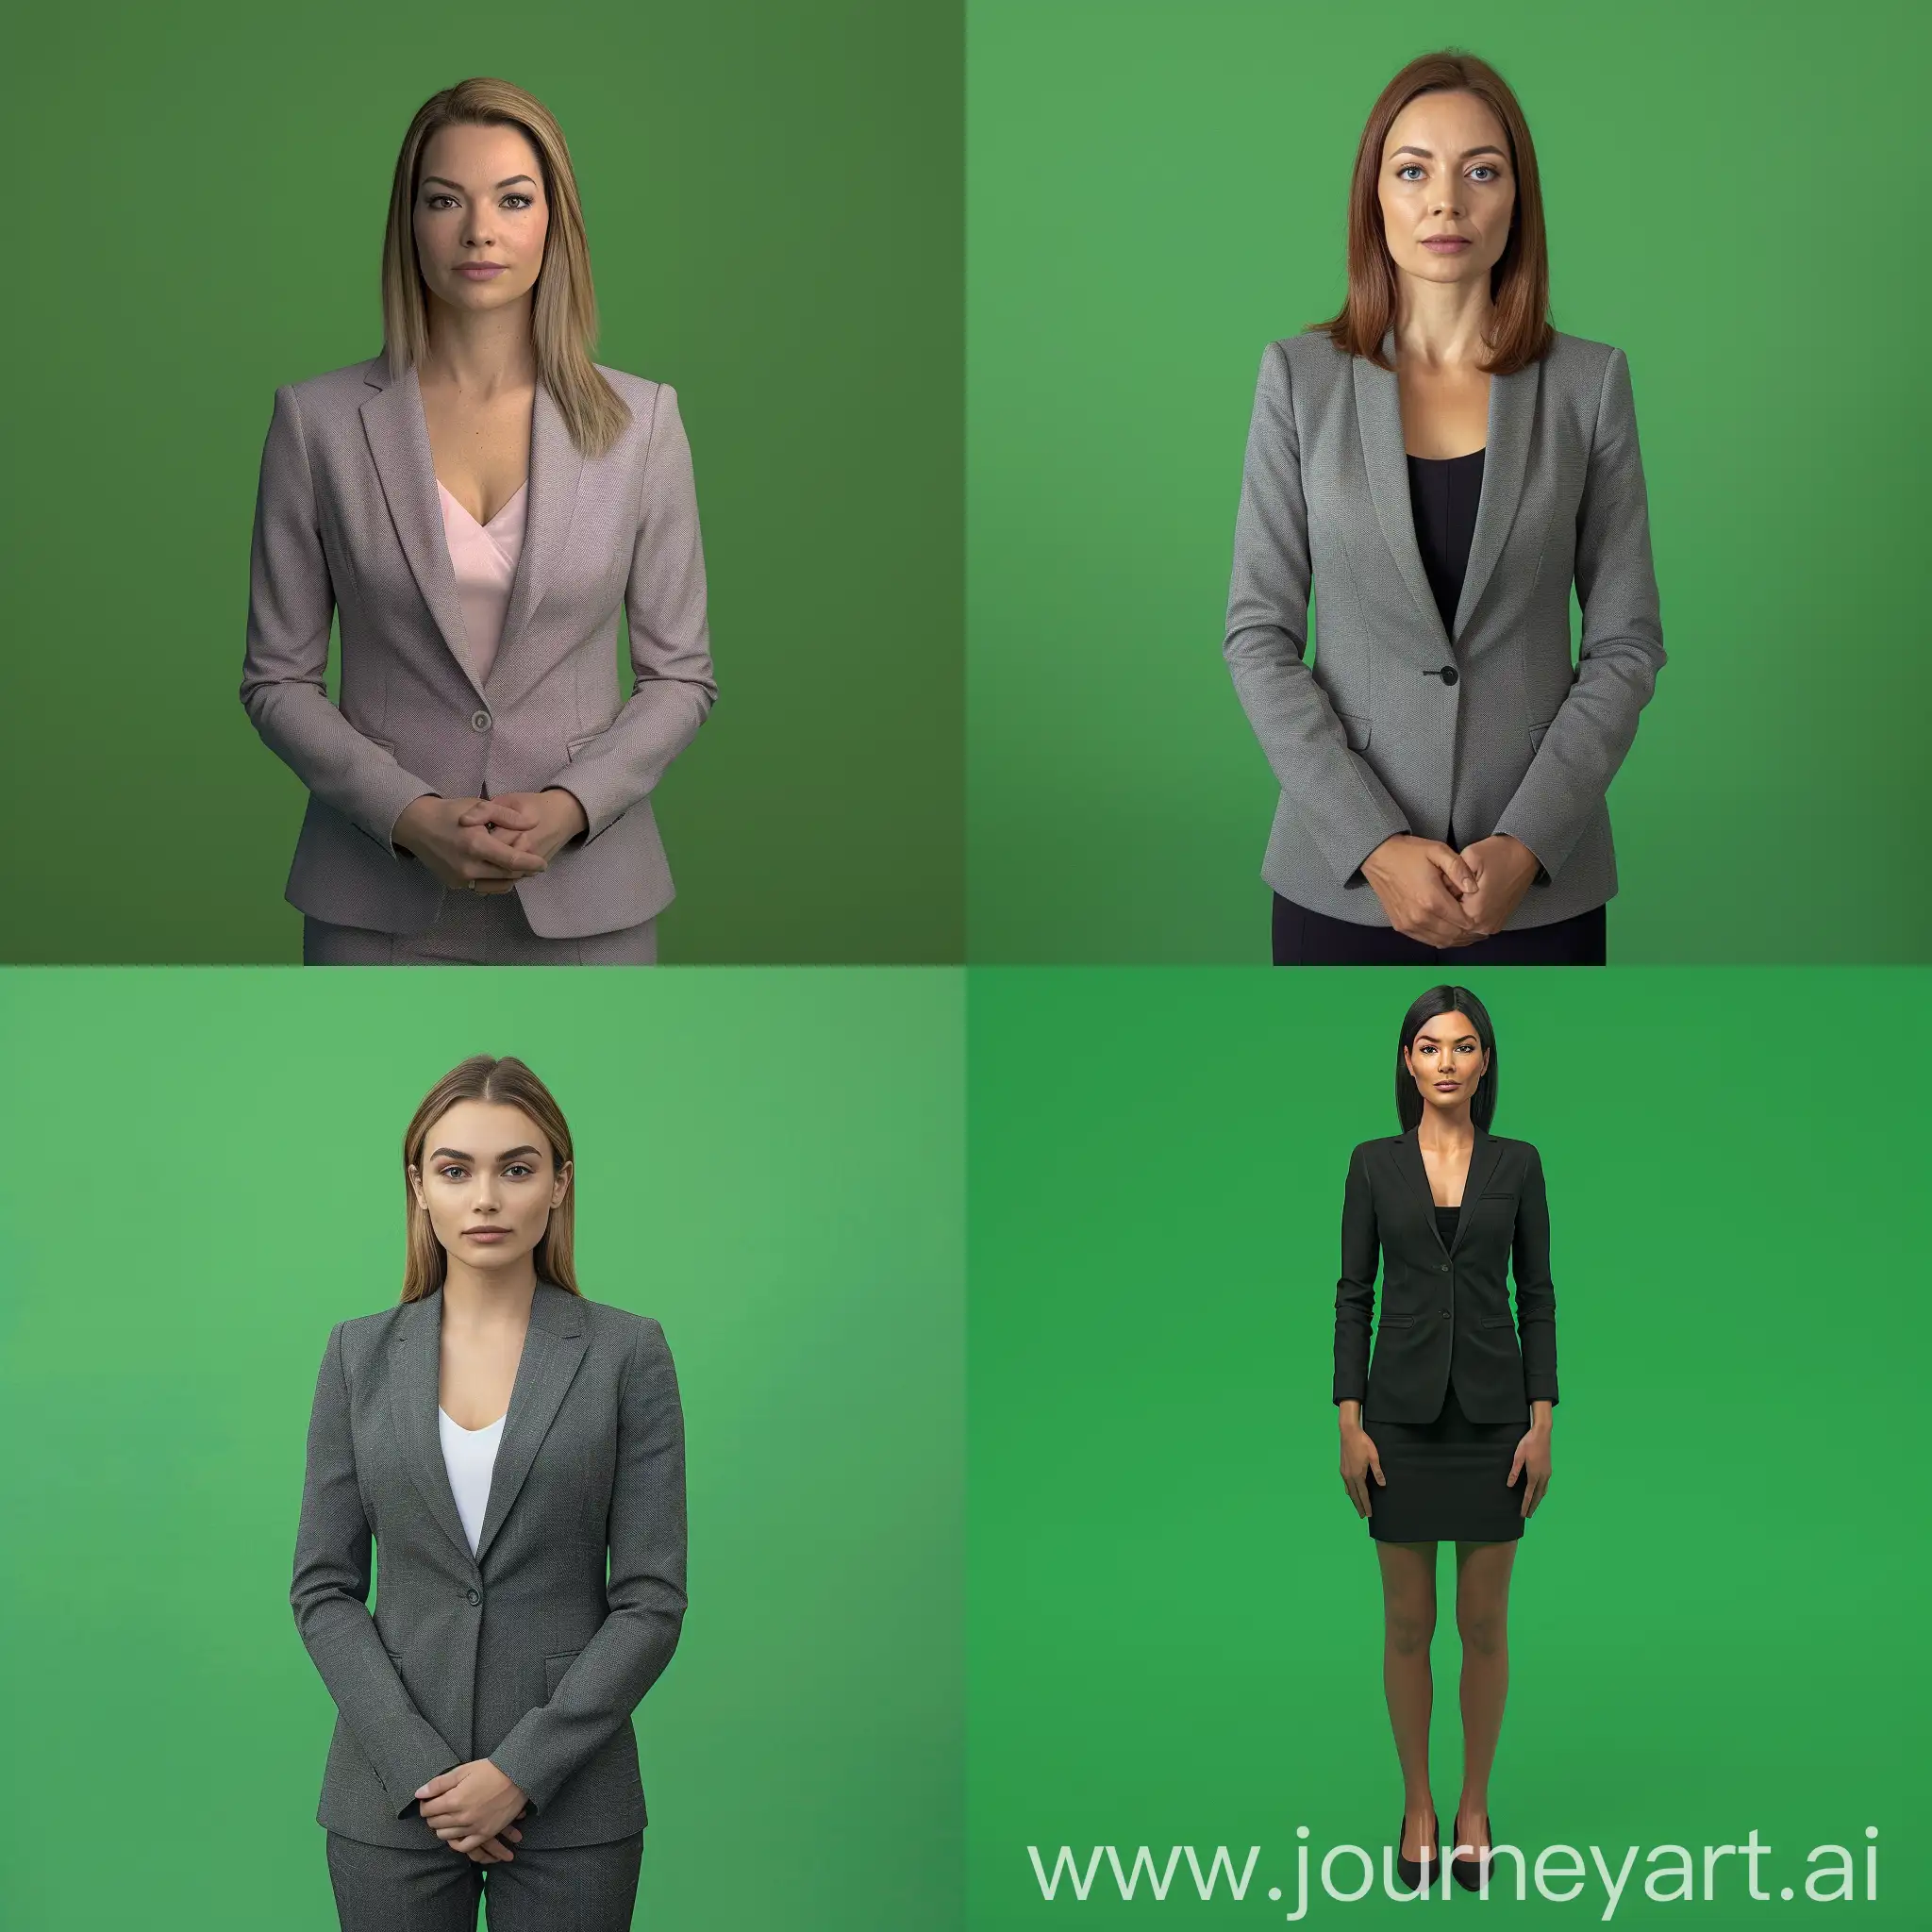 Produce a lifelike portrait of a formal female news presenter with appropriate clothing. The image should depict a presenter standing upright, still with no movement, showing their full body, with a natural expression ready to start telling the news in a rested and relaxed position. Utilize a high-quality, front-facing photograph with well-defined lighting (avoiding any shadows as the light is from the front). Ensure that the background is a solid chroma green color (0x00FF00) without any reflections or variations in hue. The presenter should have straight hair or neatly styled hair with minimal layers. Additionally, ensure that the presenter's hands are positioned naturally and comfortably, avoiding any awkward or unnatural poses.Produce a lifelike portrait of a formal female news presenter with appropriate clothing. The image should depict a presenter standing upright, still with no movement, showing their full body, with a natural expression ready to start telling the news in a rested and relaxed position. Utilize a high-quality, front-facing photograph with well-defined lighting (avoiding any shadows as the light is from the front). Ensure that the background is a solid chroma green color (0x00FF00) without any reflections or variations in hue. The presenter should have straight hair or neatly styled hair with minimal layers. Additionally, ensure that the presenter's hands are positioned naturally and comfortably, avoiding any awkward or unnatural poses.